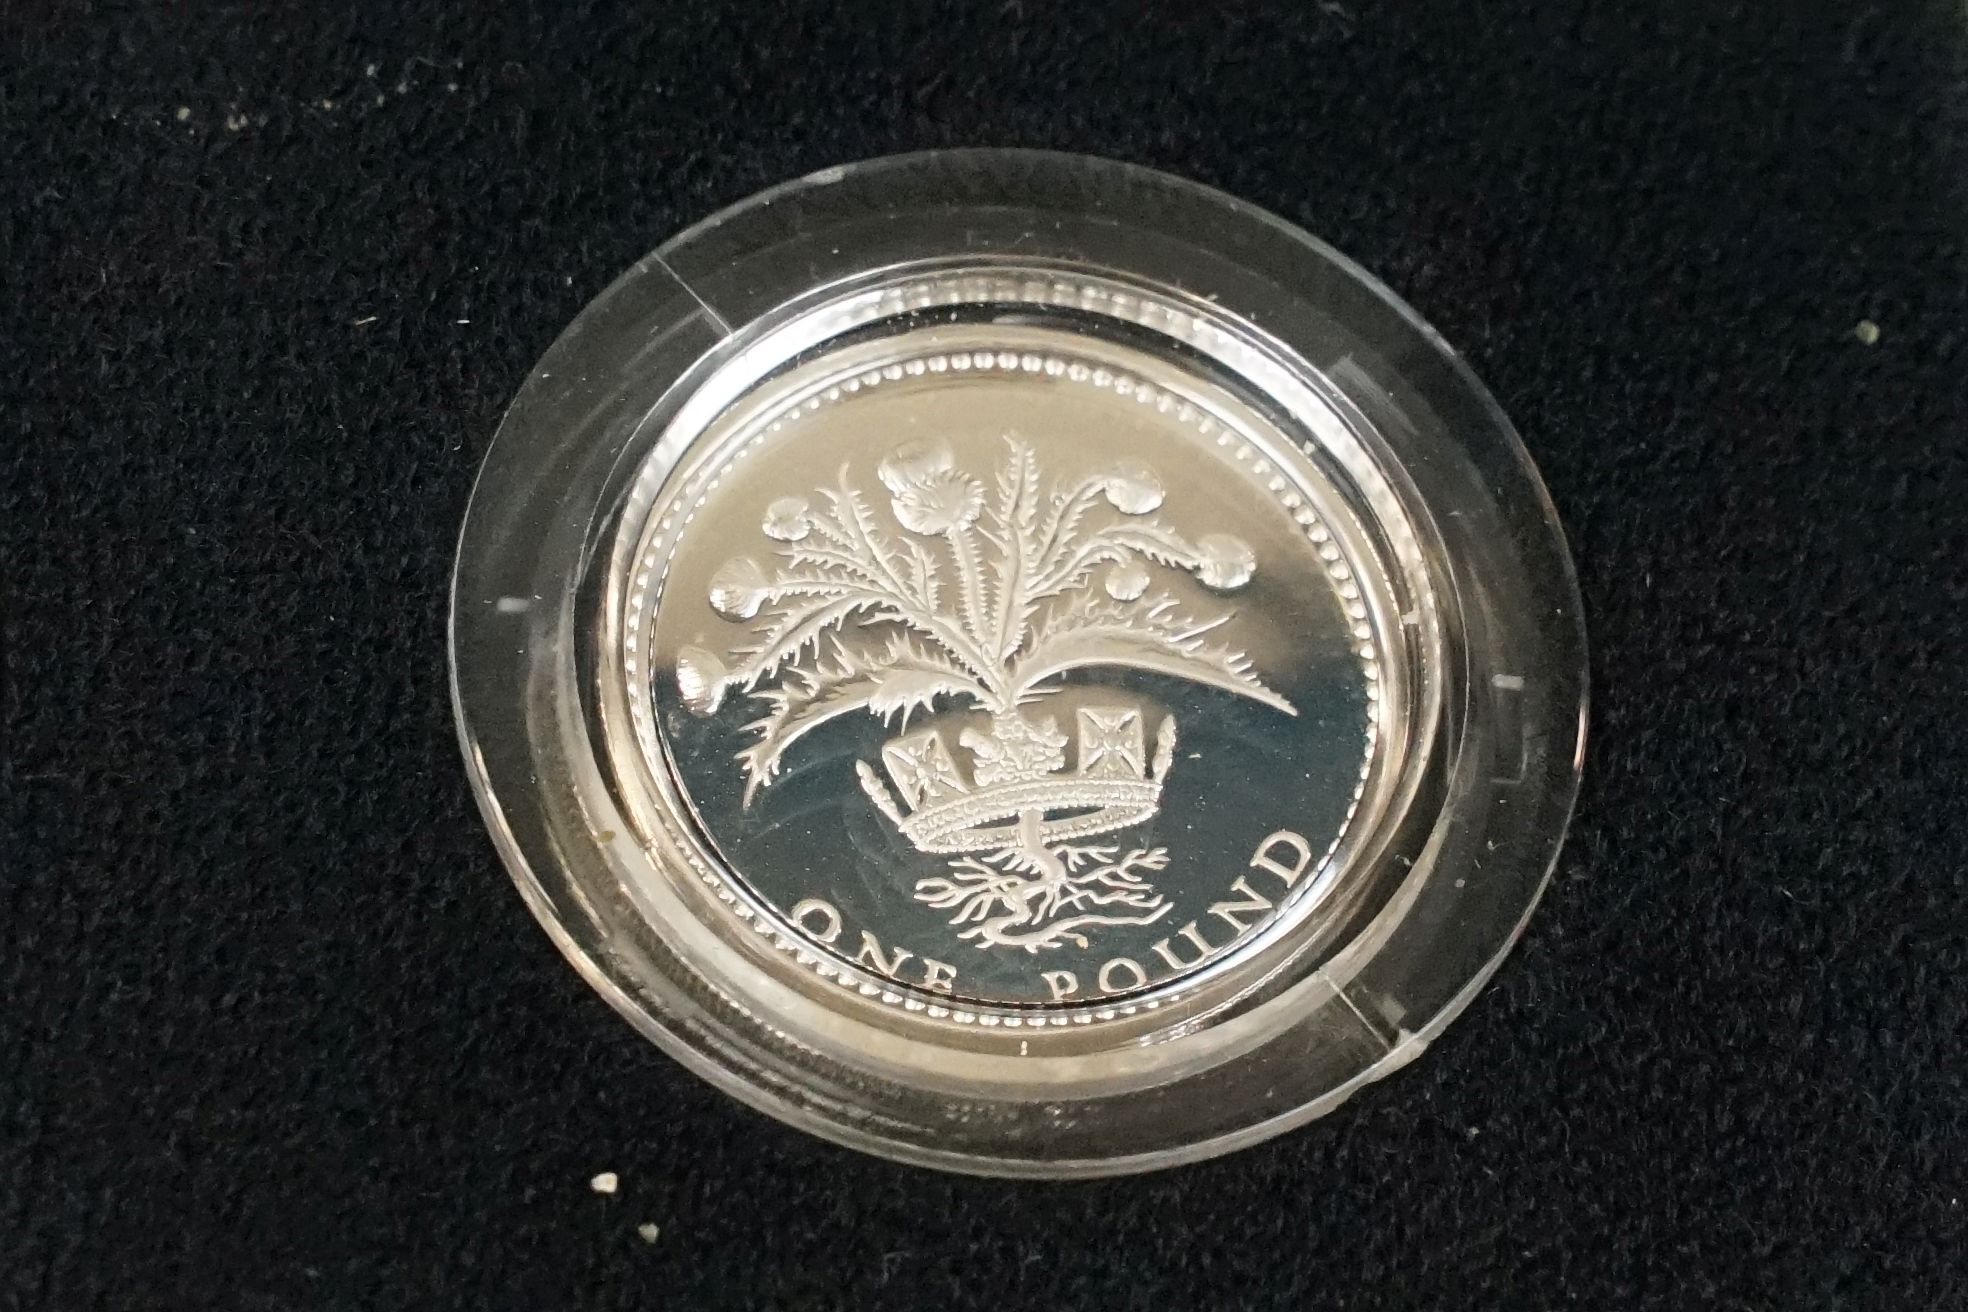 A collection of four Royal Mint silver proof £1 coins to include 2002, 2003, 1989 and 1984 examples, - Image 12 of 13